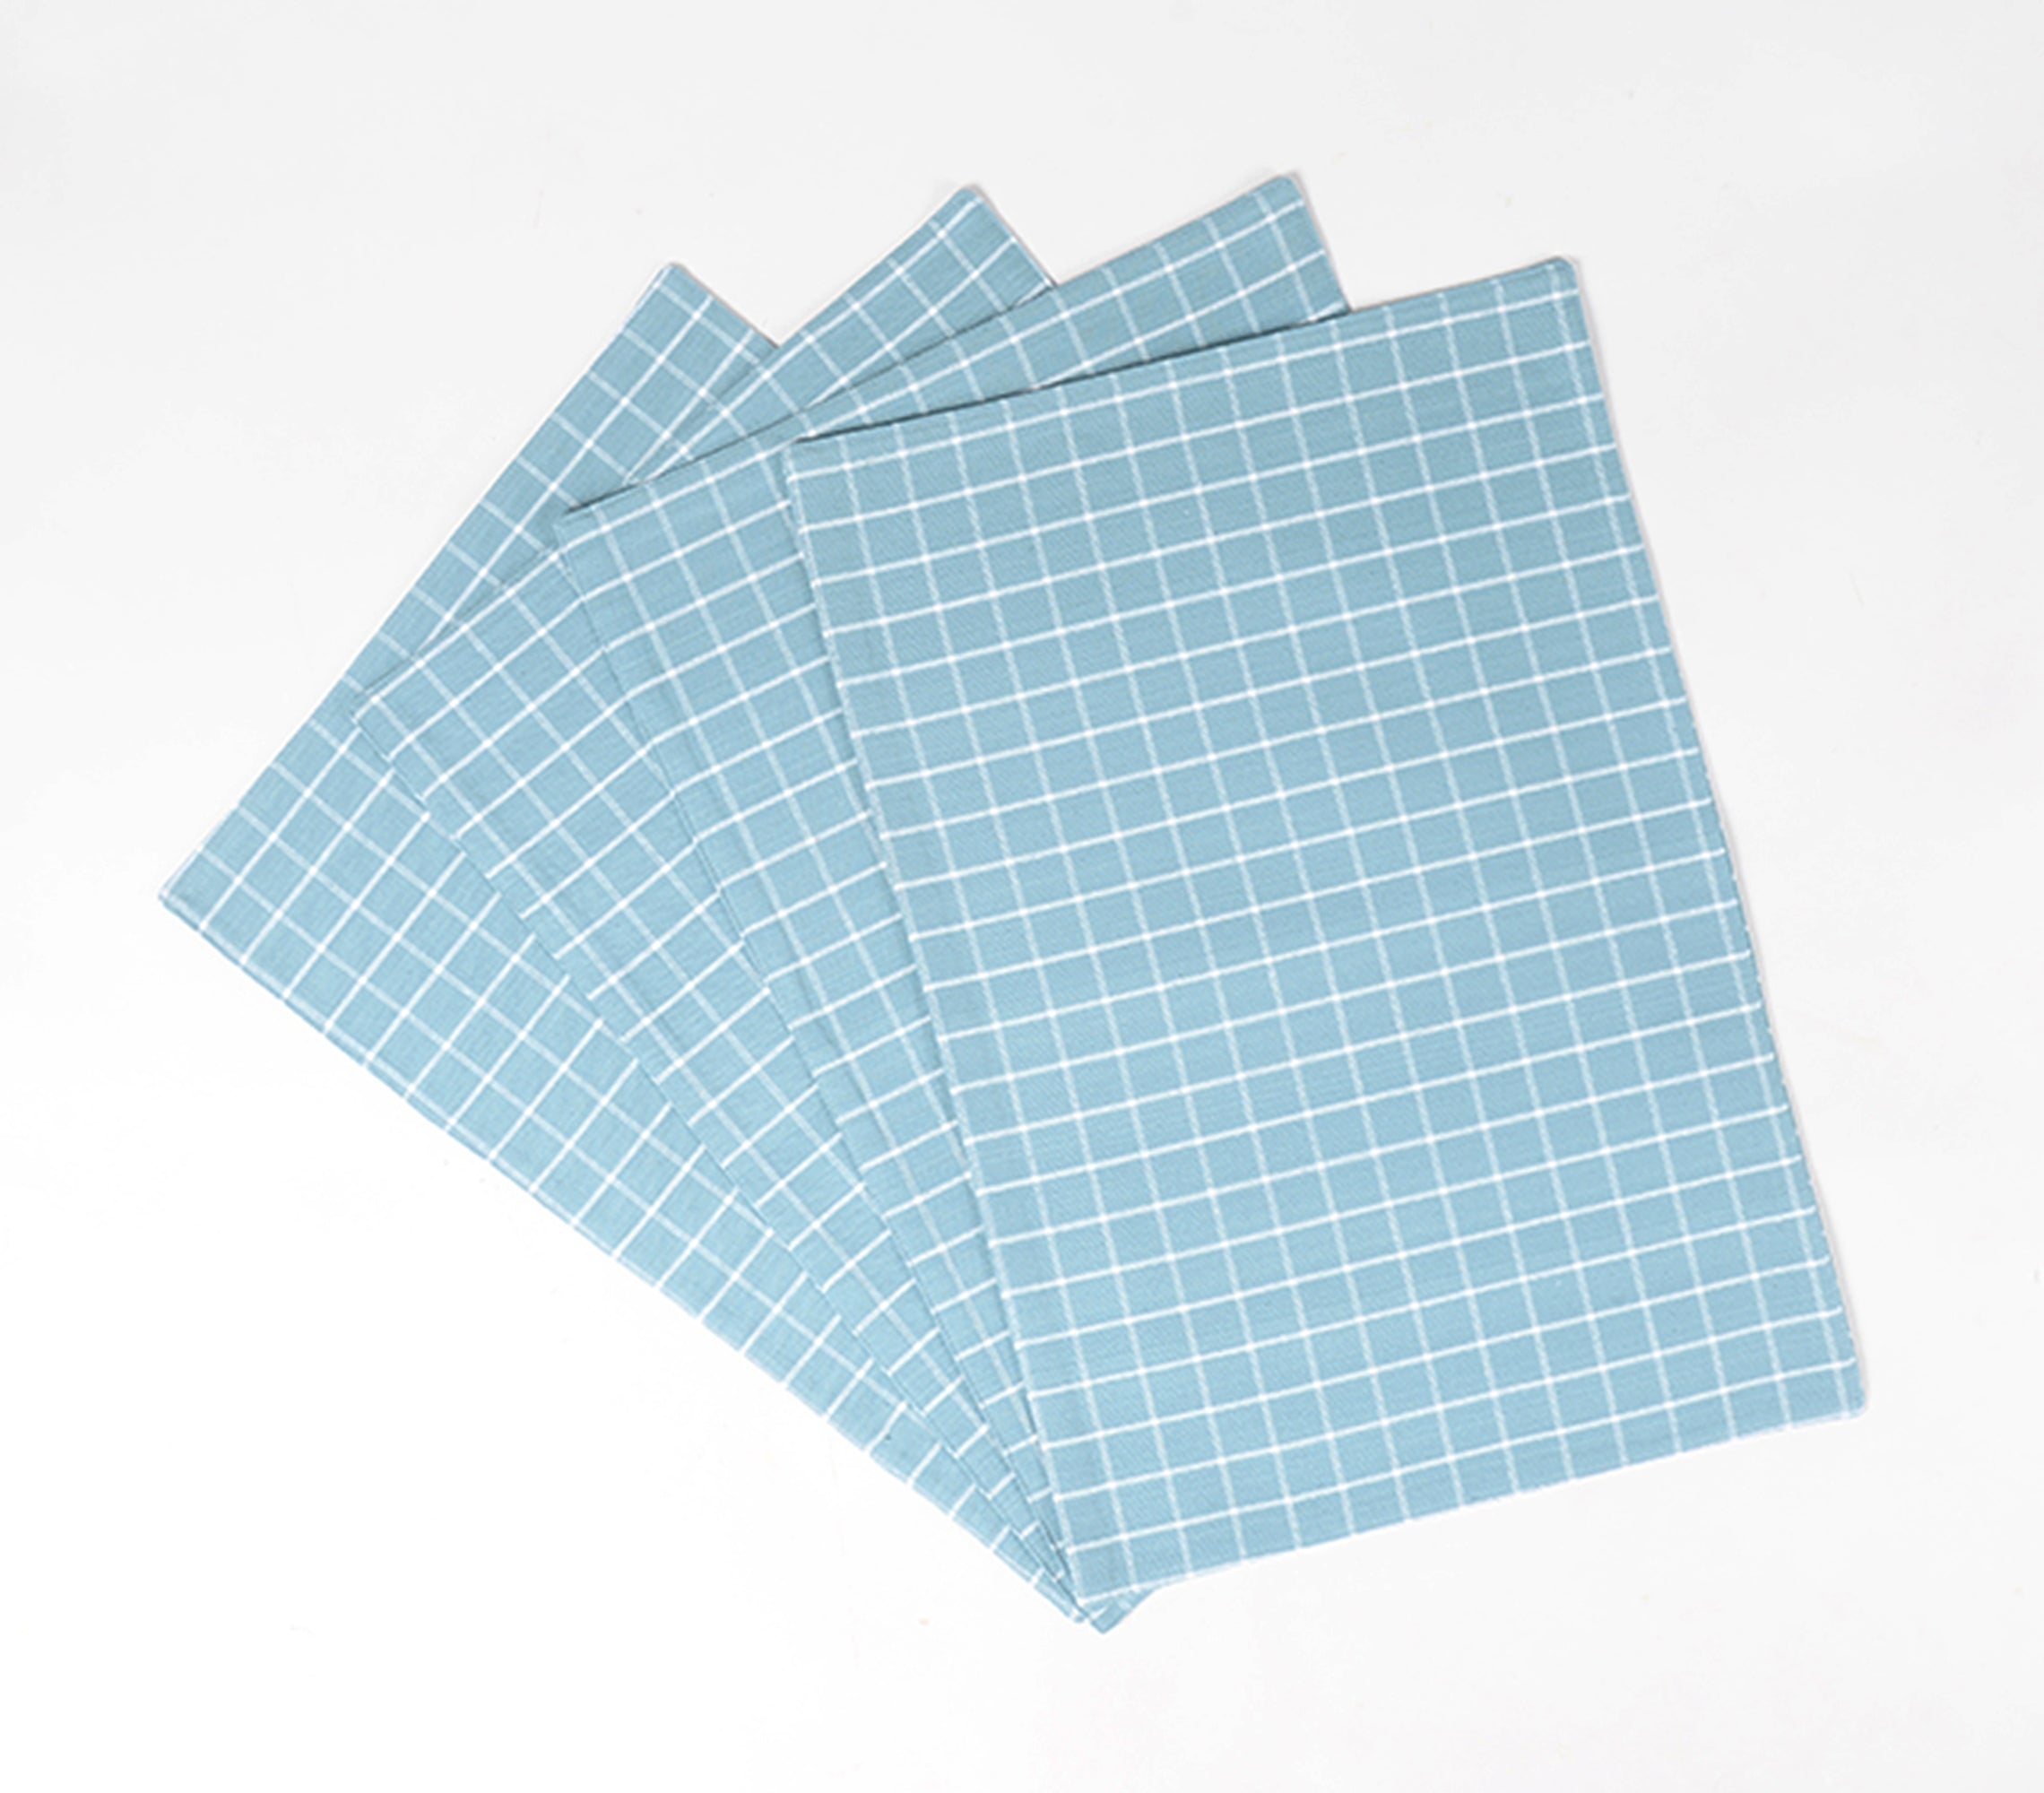 Checkered Sky Cotton Placemats (set of 4), 18.5 X 13 inch- 2 SETS